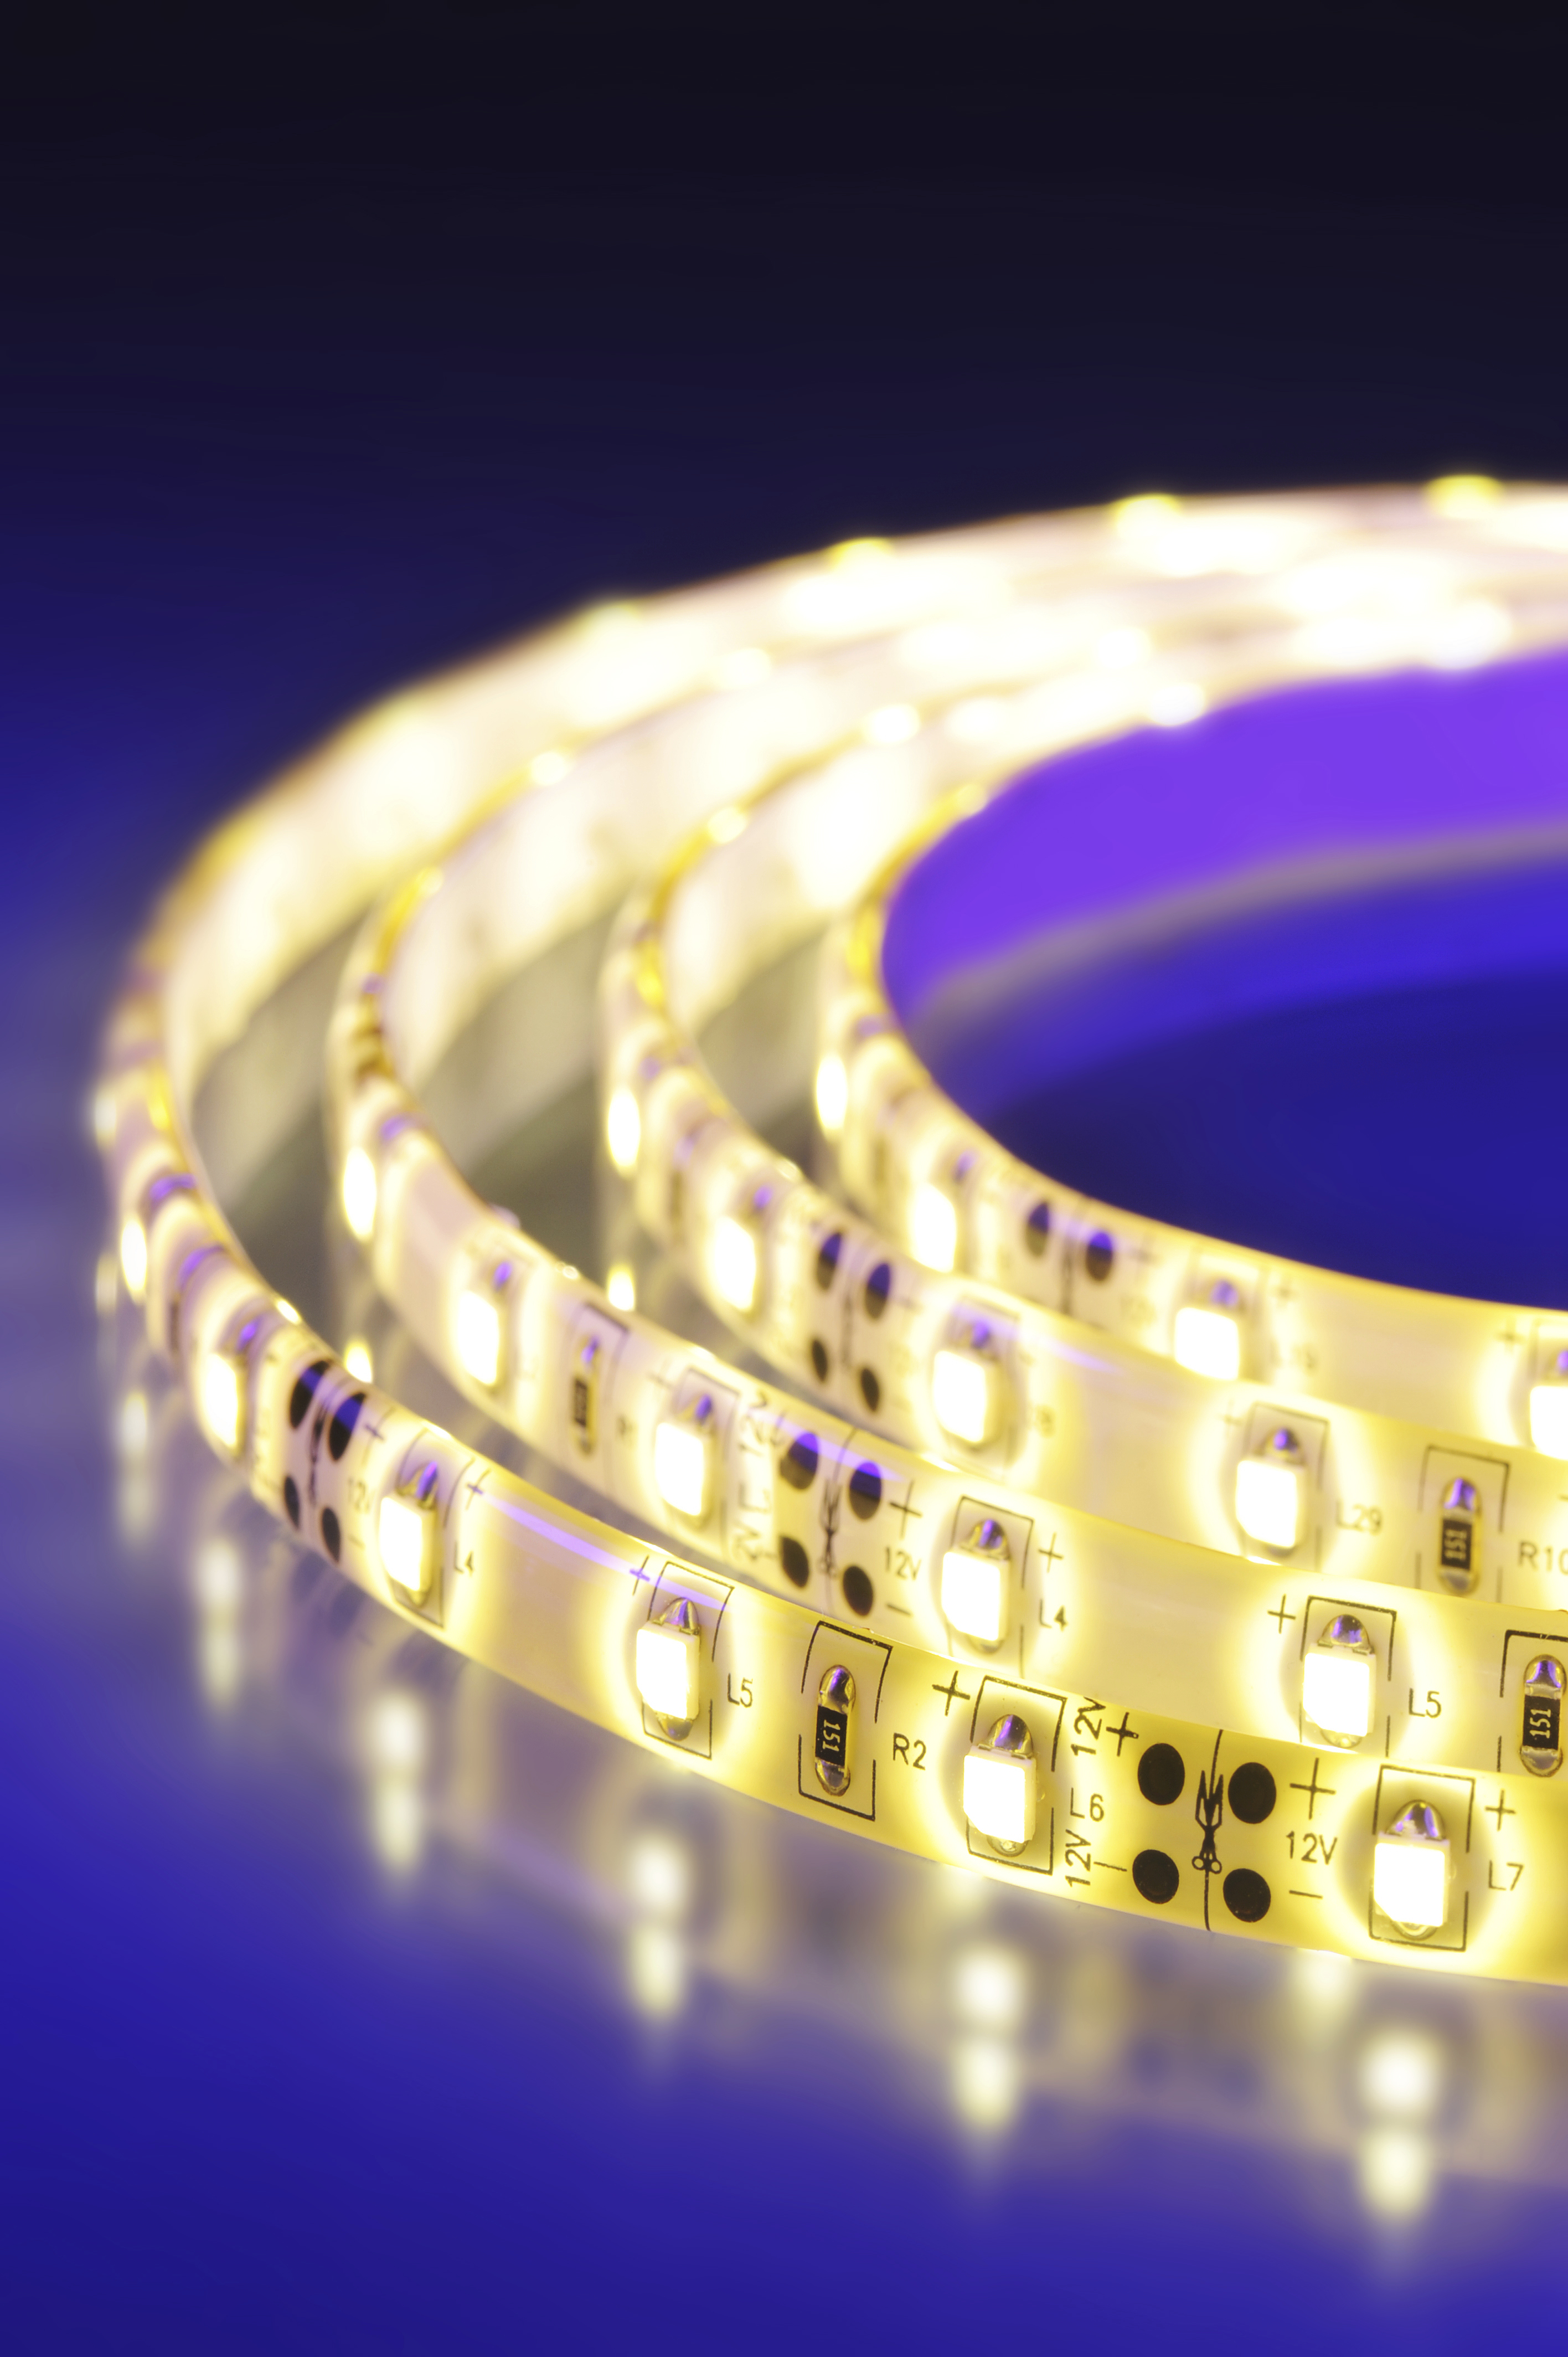 Carbodeon nanodiamonds are combined with polymers for use in fields such as LED lighting personal electronics automotive components and machine tools.